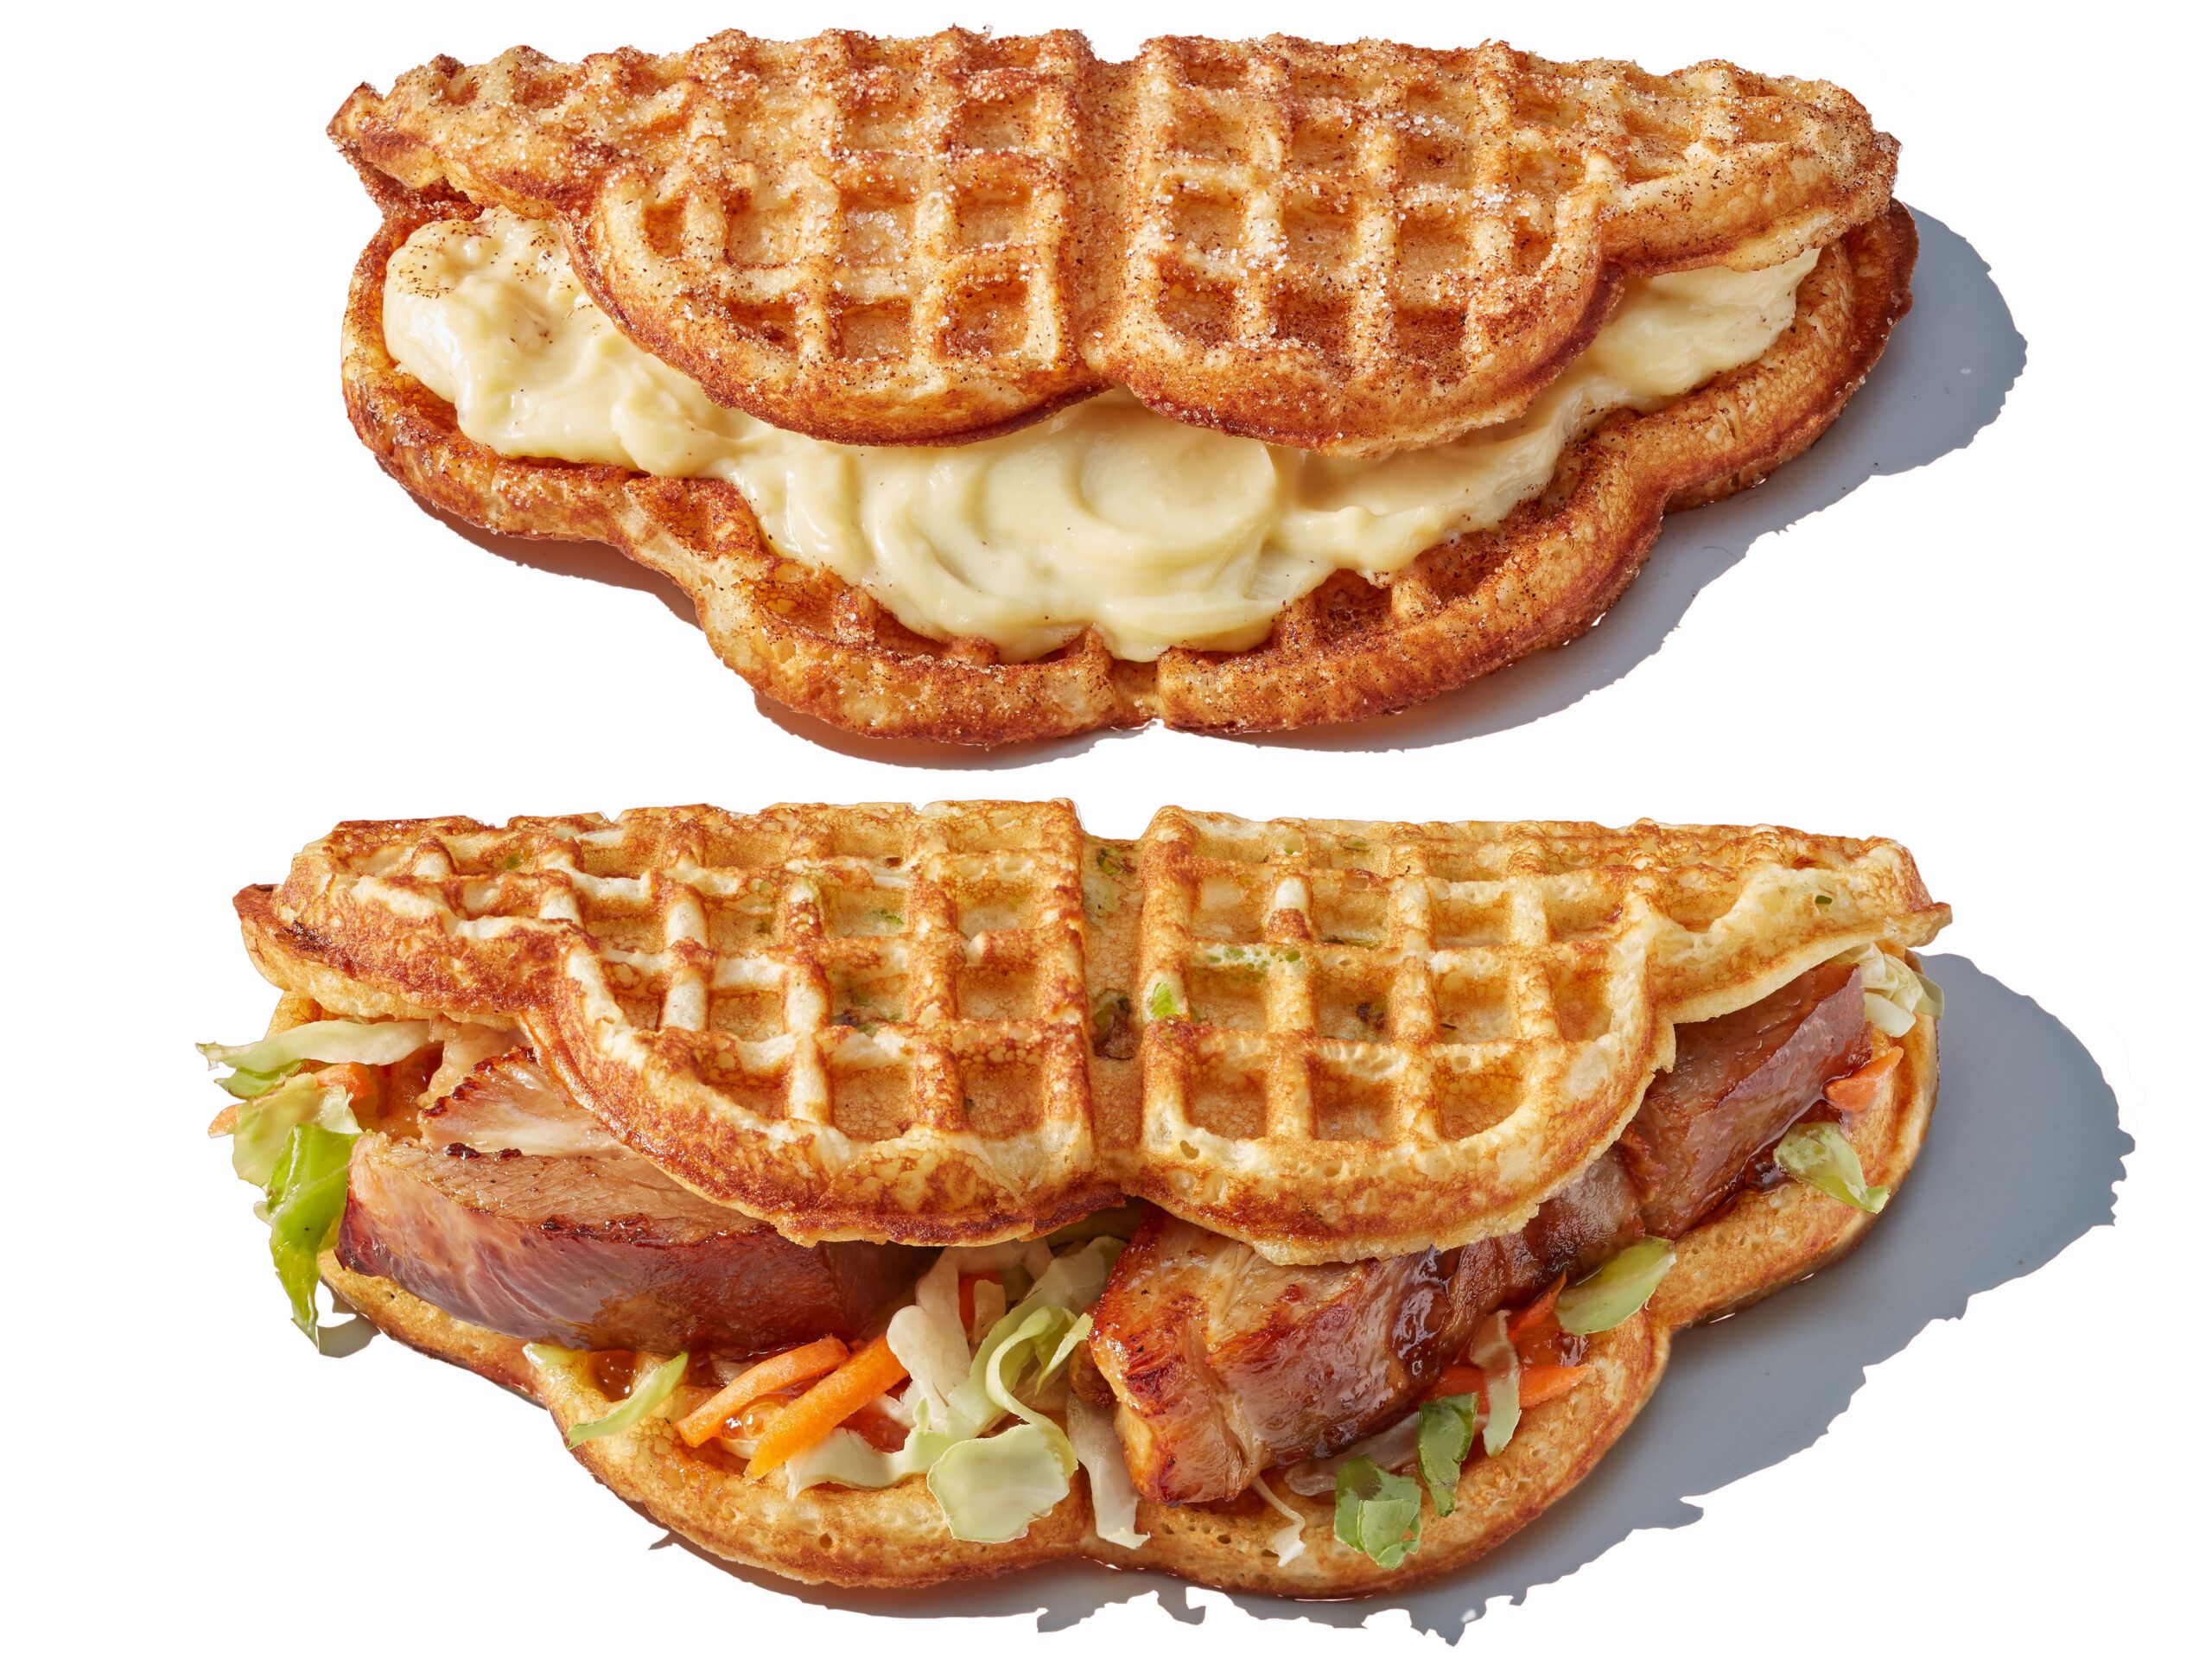 nordic-waffles-belly-full-nordic-waffle-and-vanilla-dream-nordic-waffle